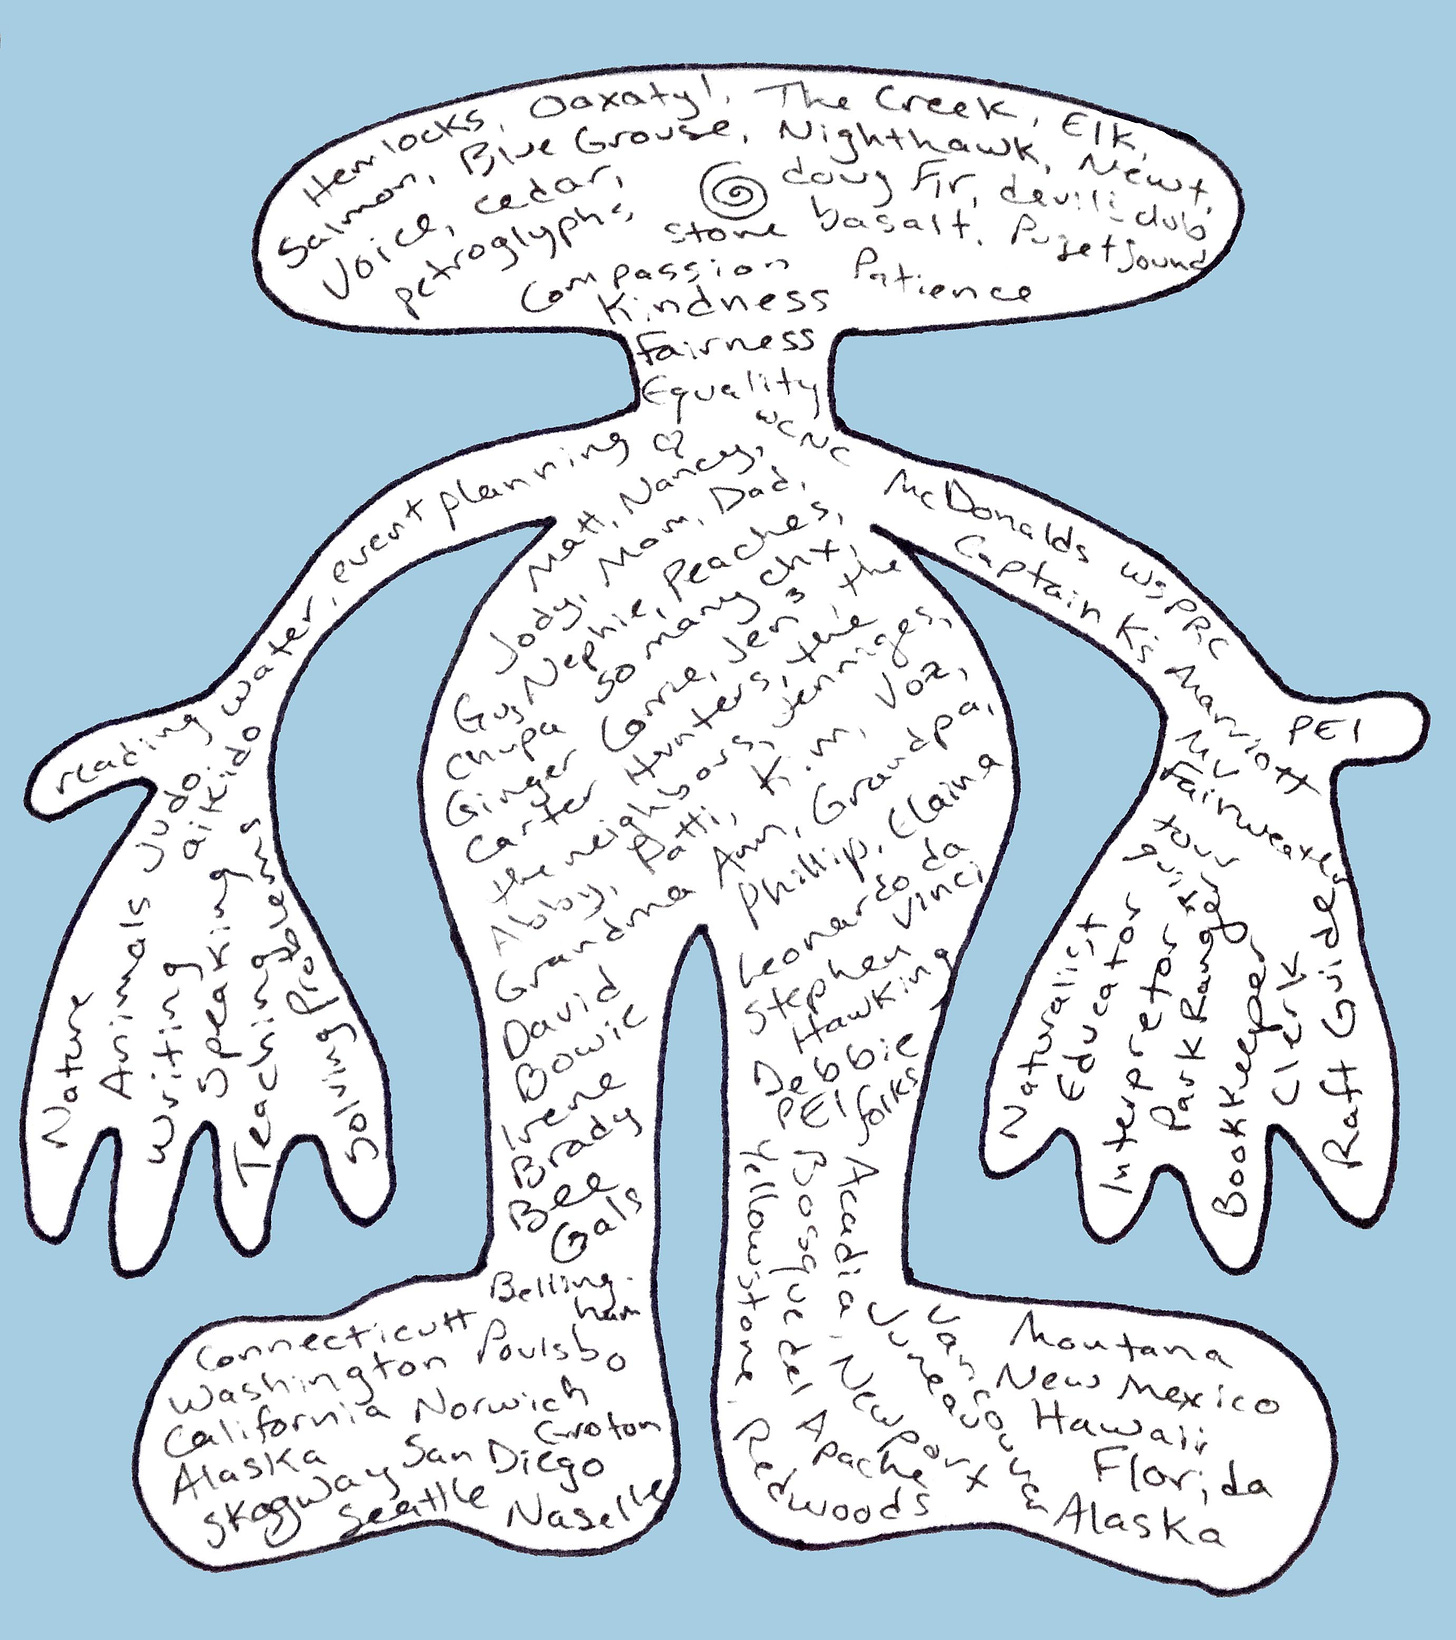 A human-shaped outline on a light blue background is filled with words depicting different memories of the author.